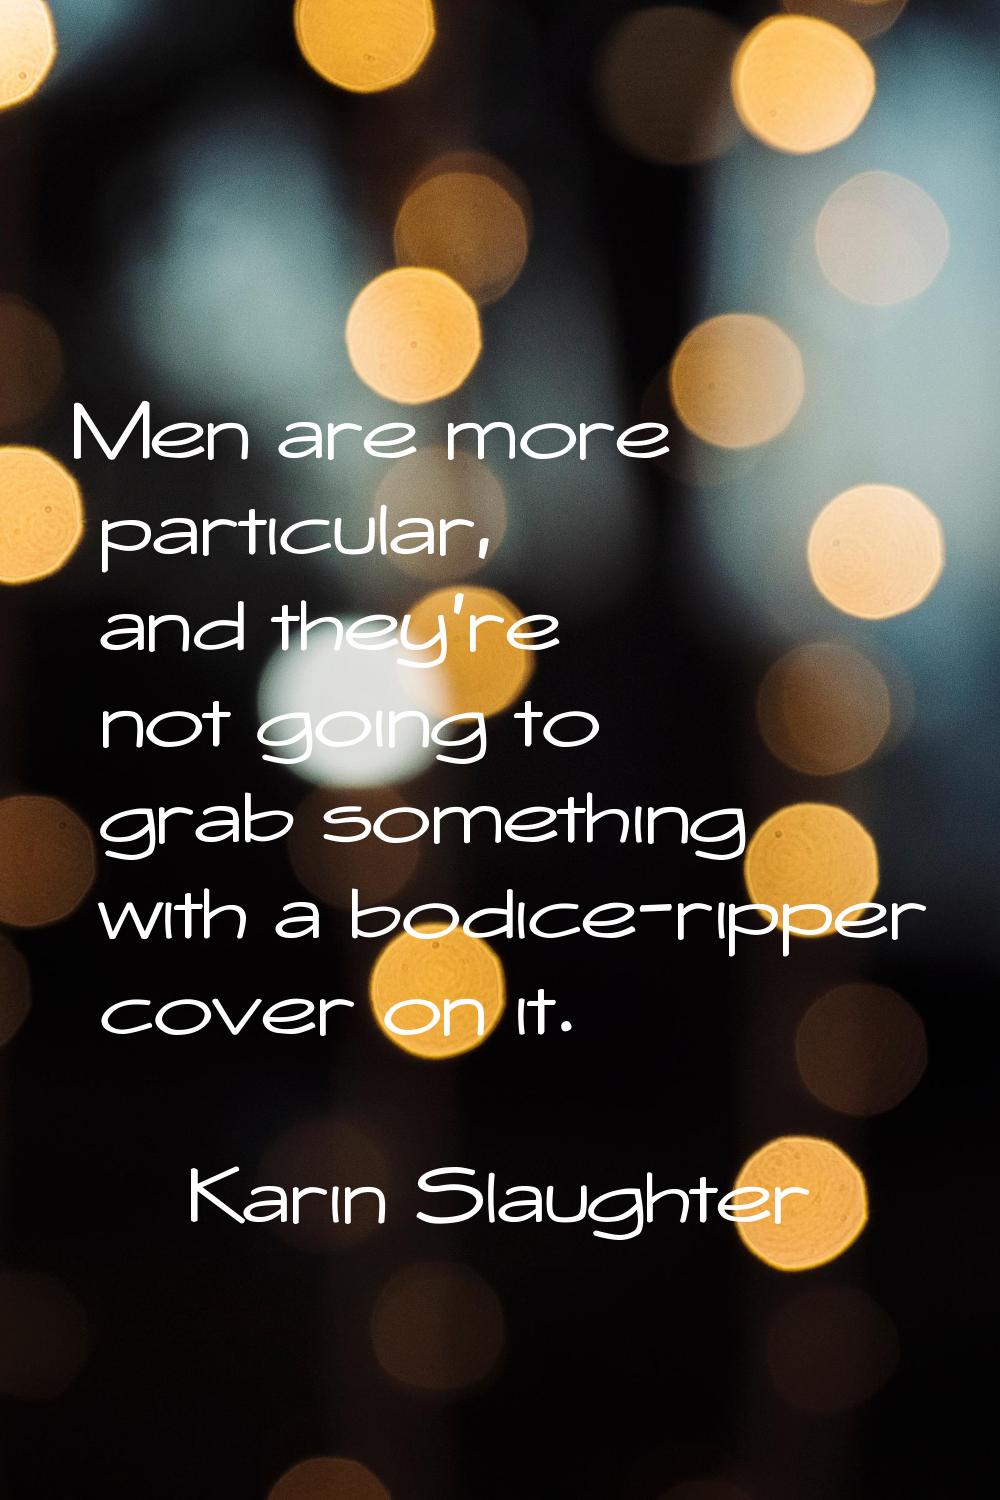 Men are more particular, and they're not going to grab something with a bodice-ripper cover on it.